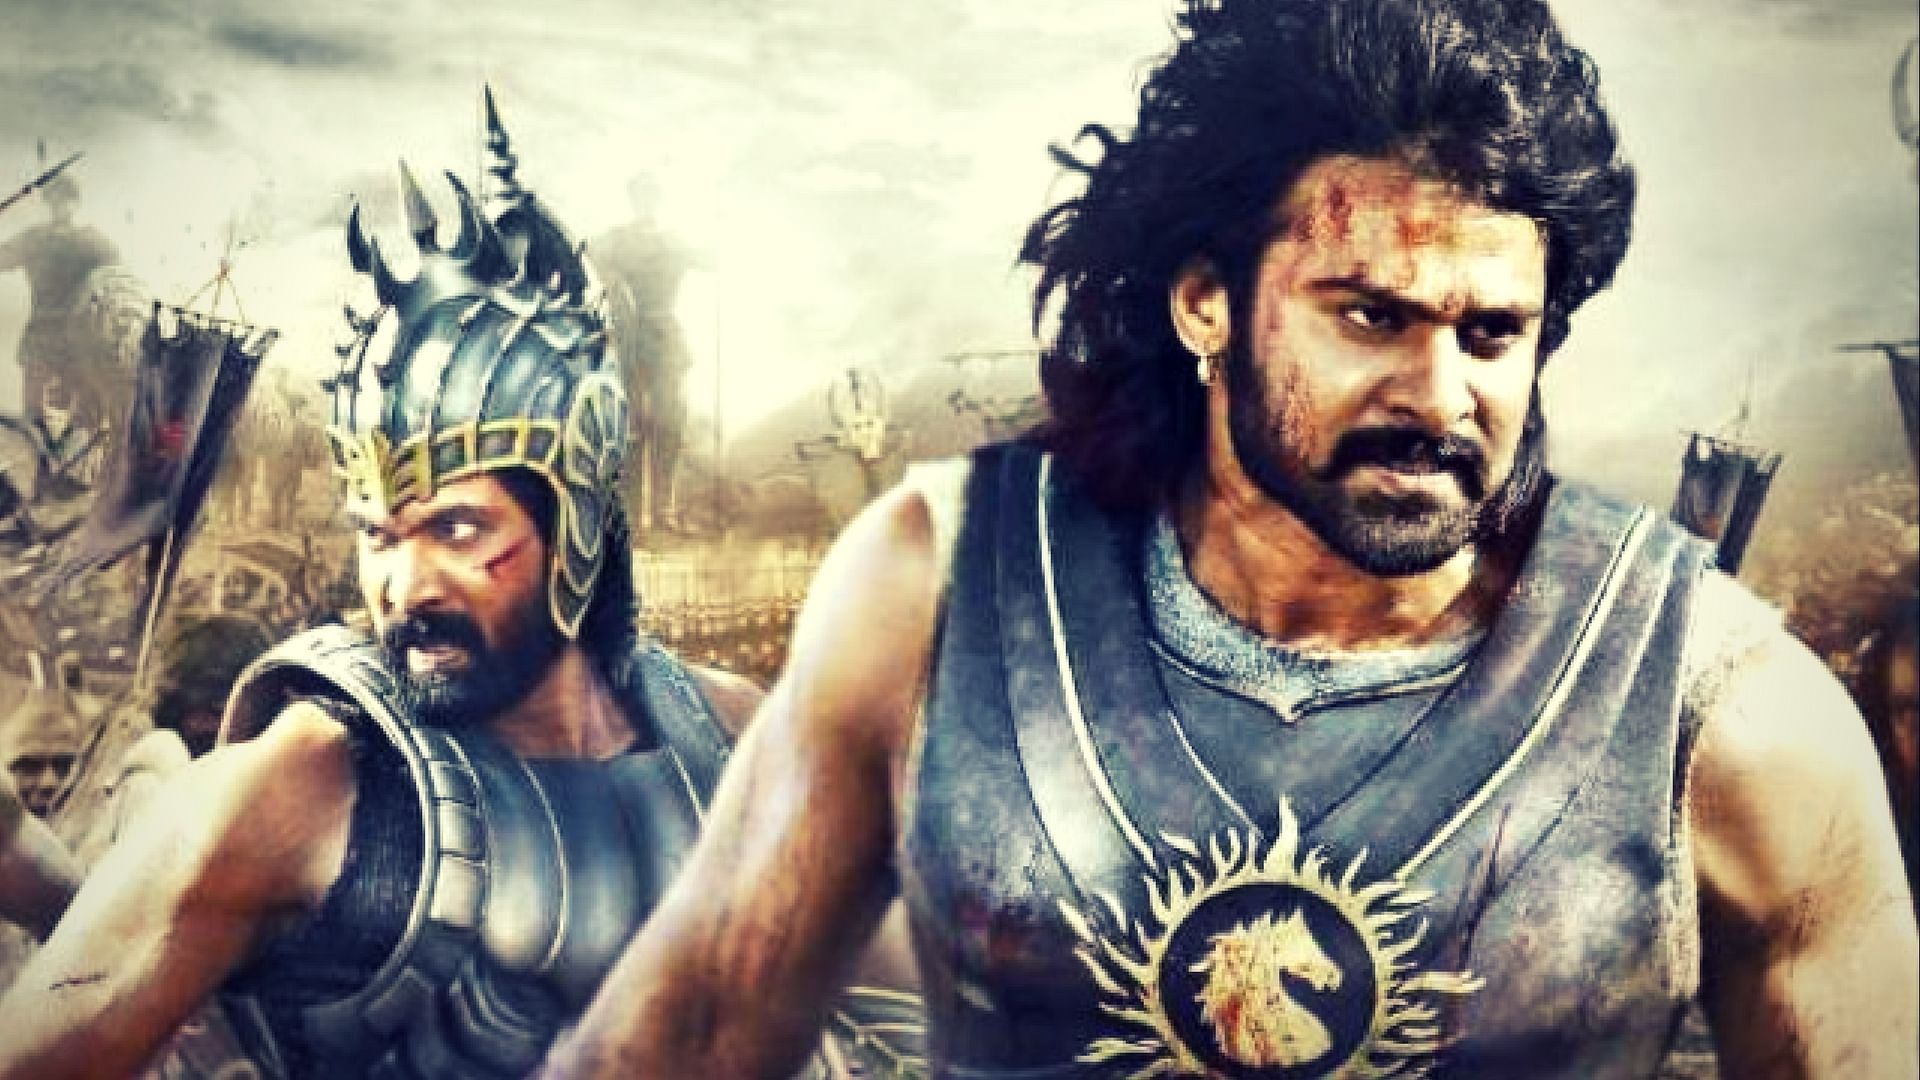 Bahubali Wall Posters For Bedroom Living Room Office 3D Poster - Movies  posters in India - Buy art, film, design, movie, music, nature and  educational paintings/wallpapers at Flipkart.com